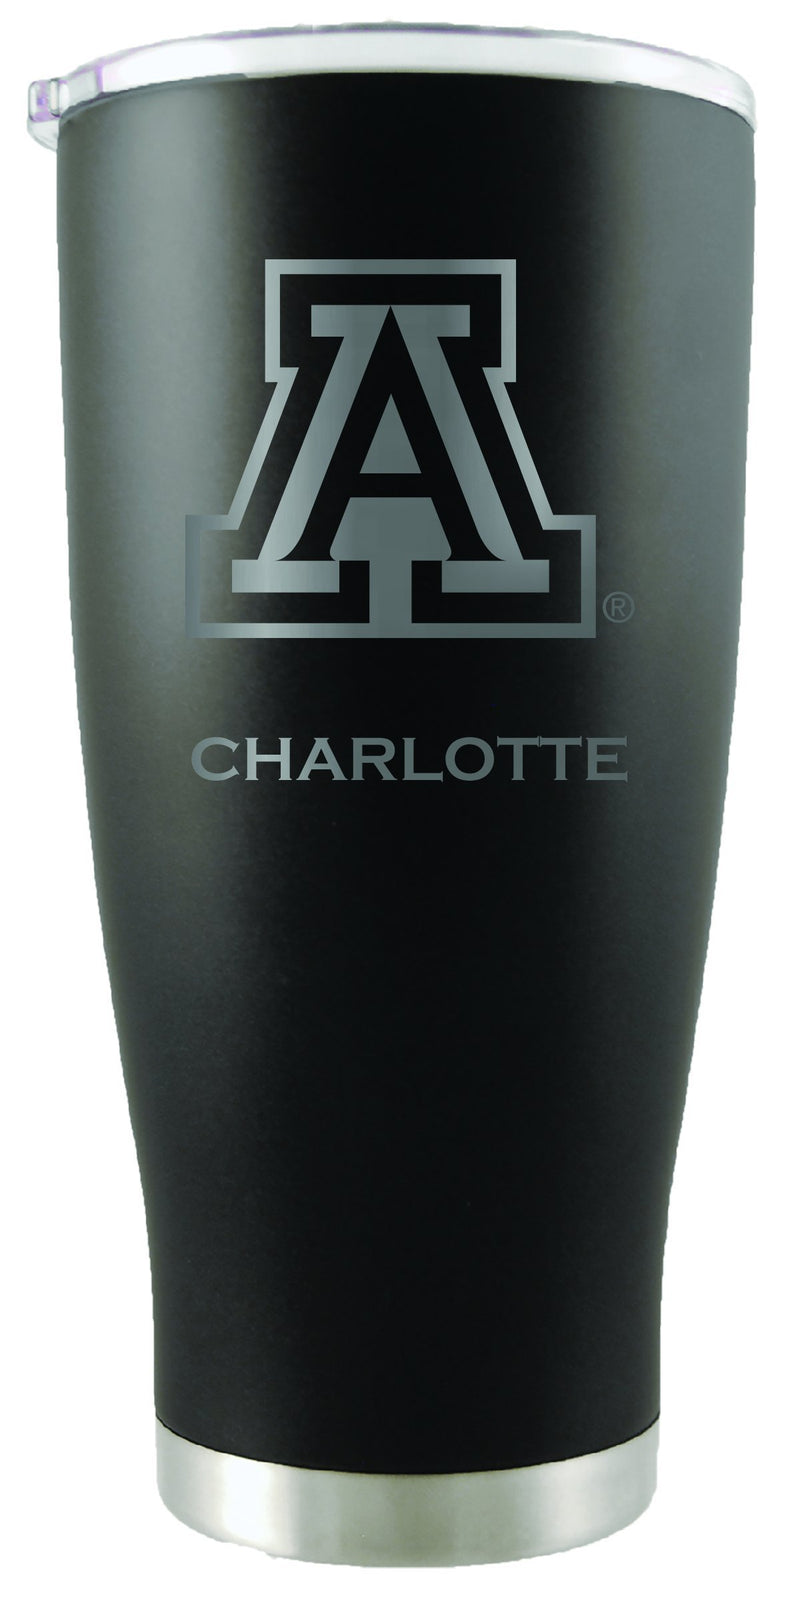 20oz Black Personalized Stainless Steel Tumbler | Arizona Wildcats
Arizona Wildcats, ARZ, COL, CurrentProduct, Drinkware_category_All, Personalized_Personalized
The Memory Company